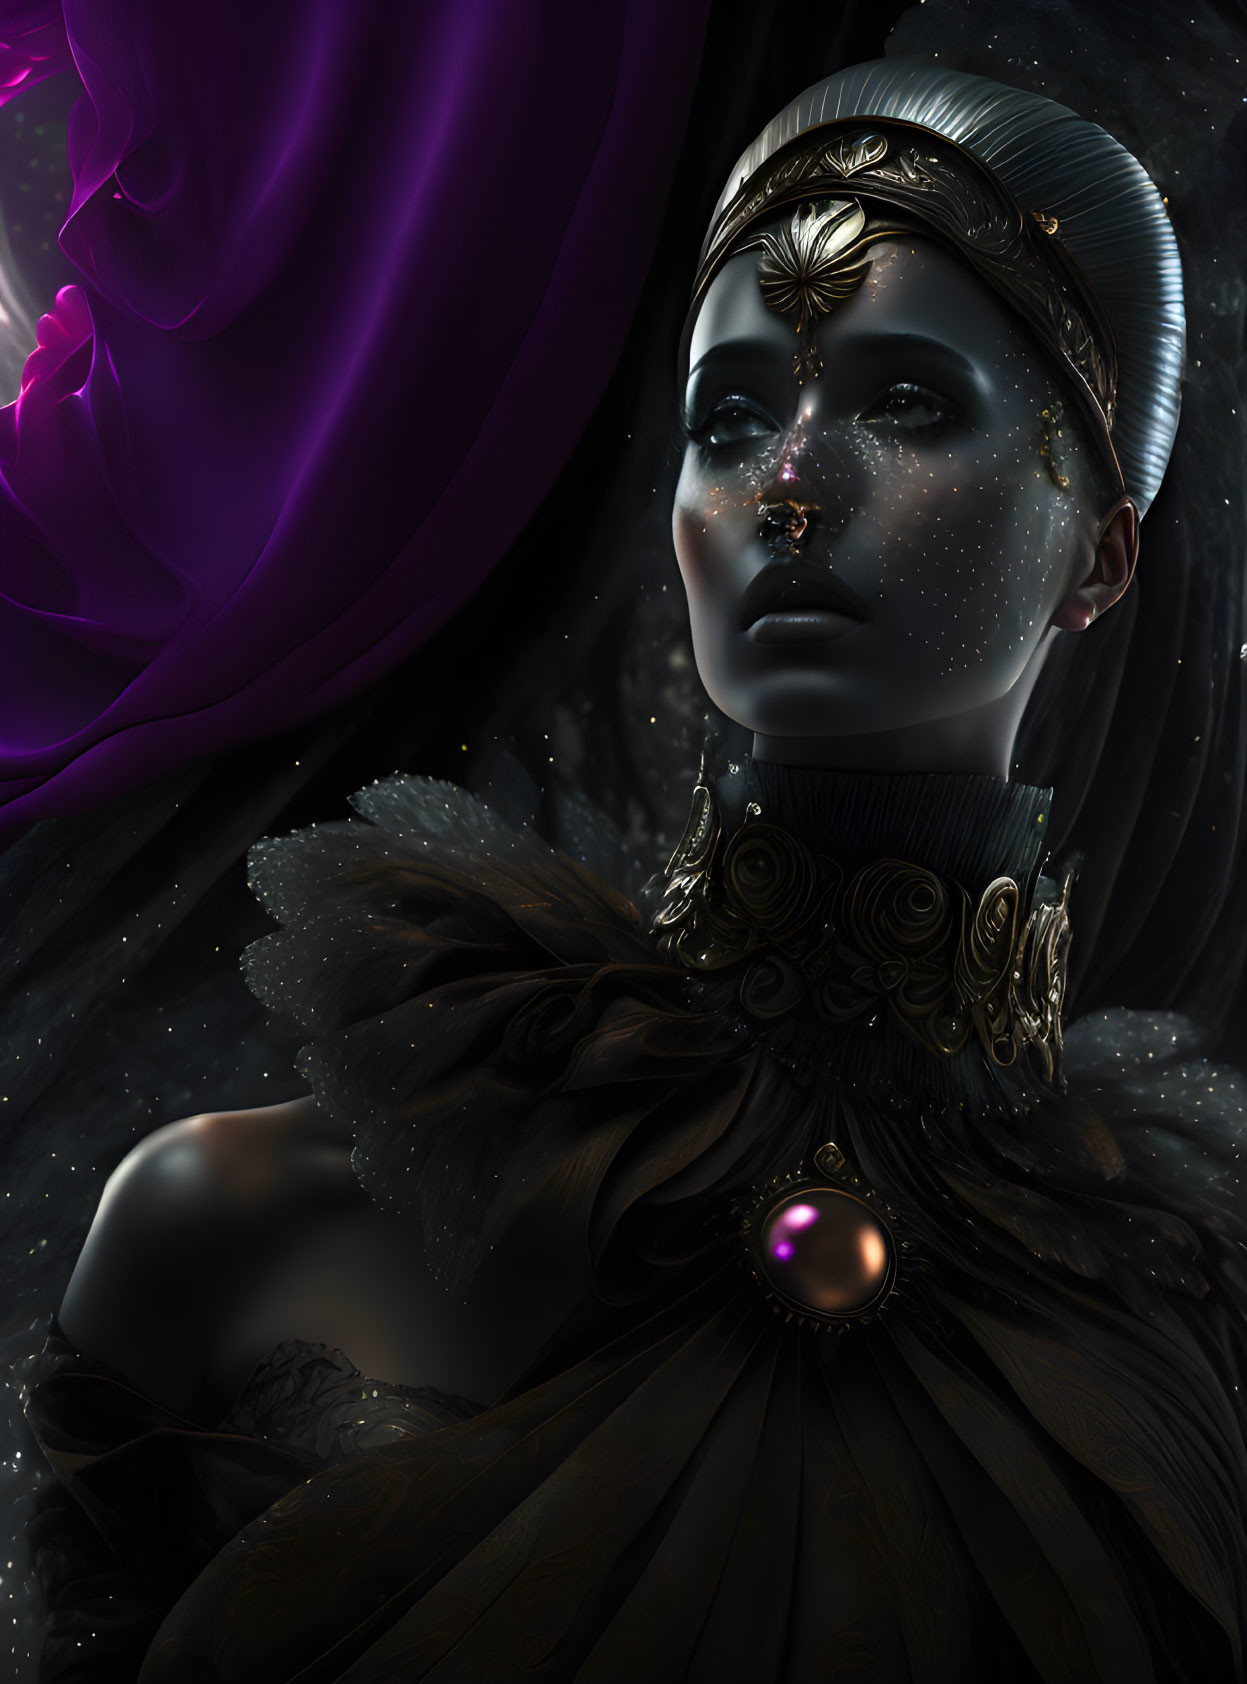 Dark-skinned woman with embellished features and orb jewelry in mysterious setting